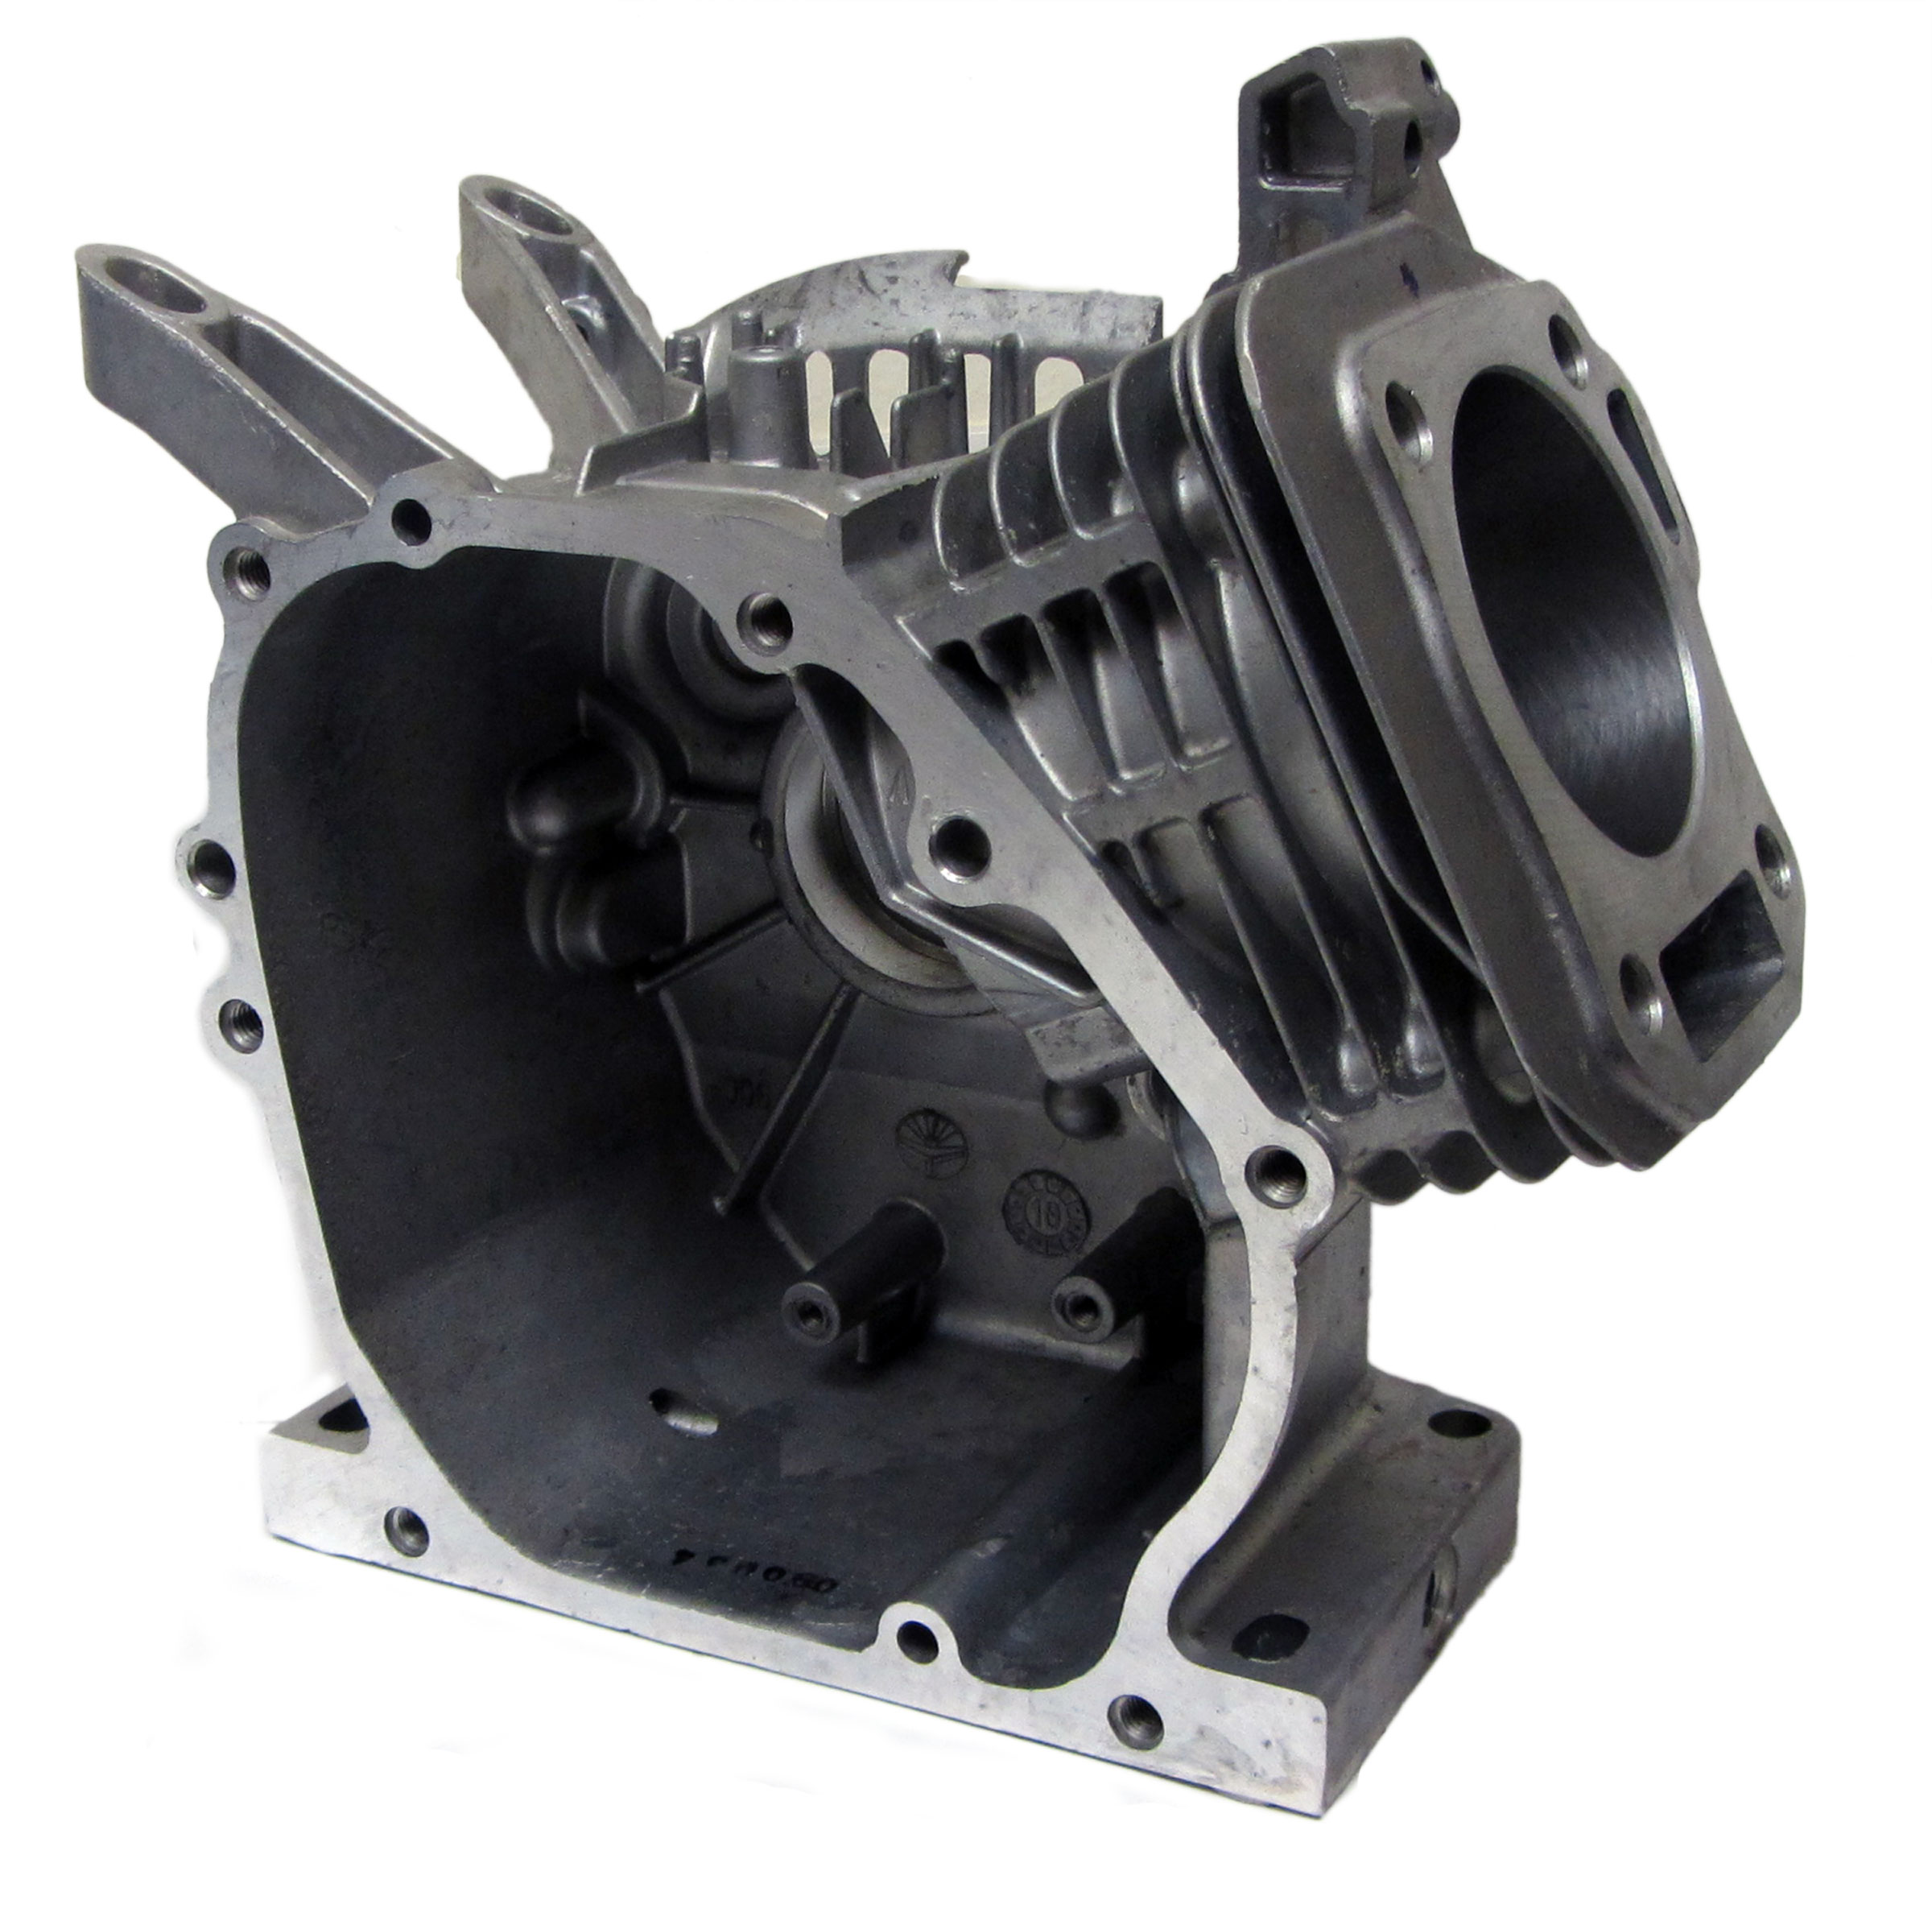 Crank Case for 6.5HP Clone or GX200 Engine | 711270 | BMI Karts And ...